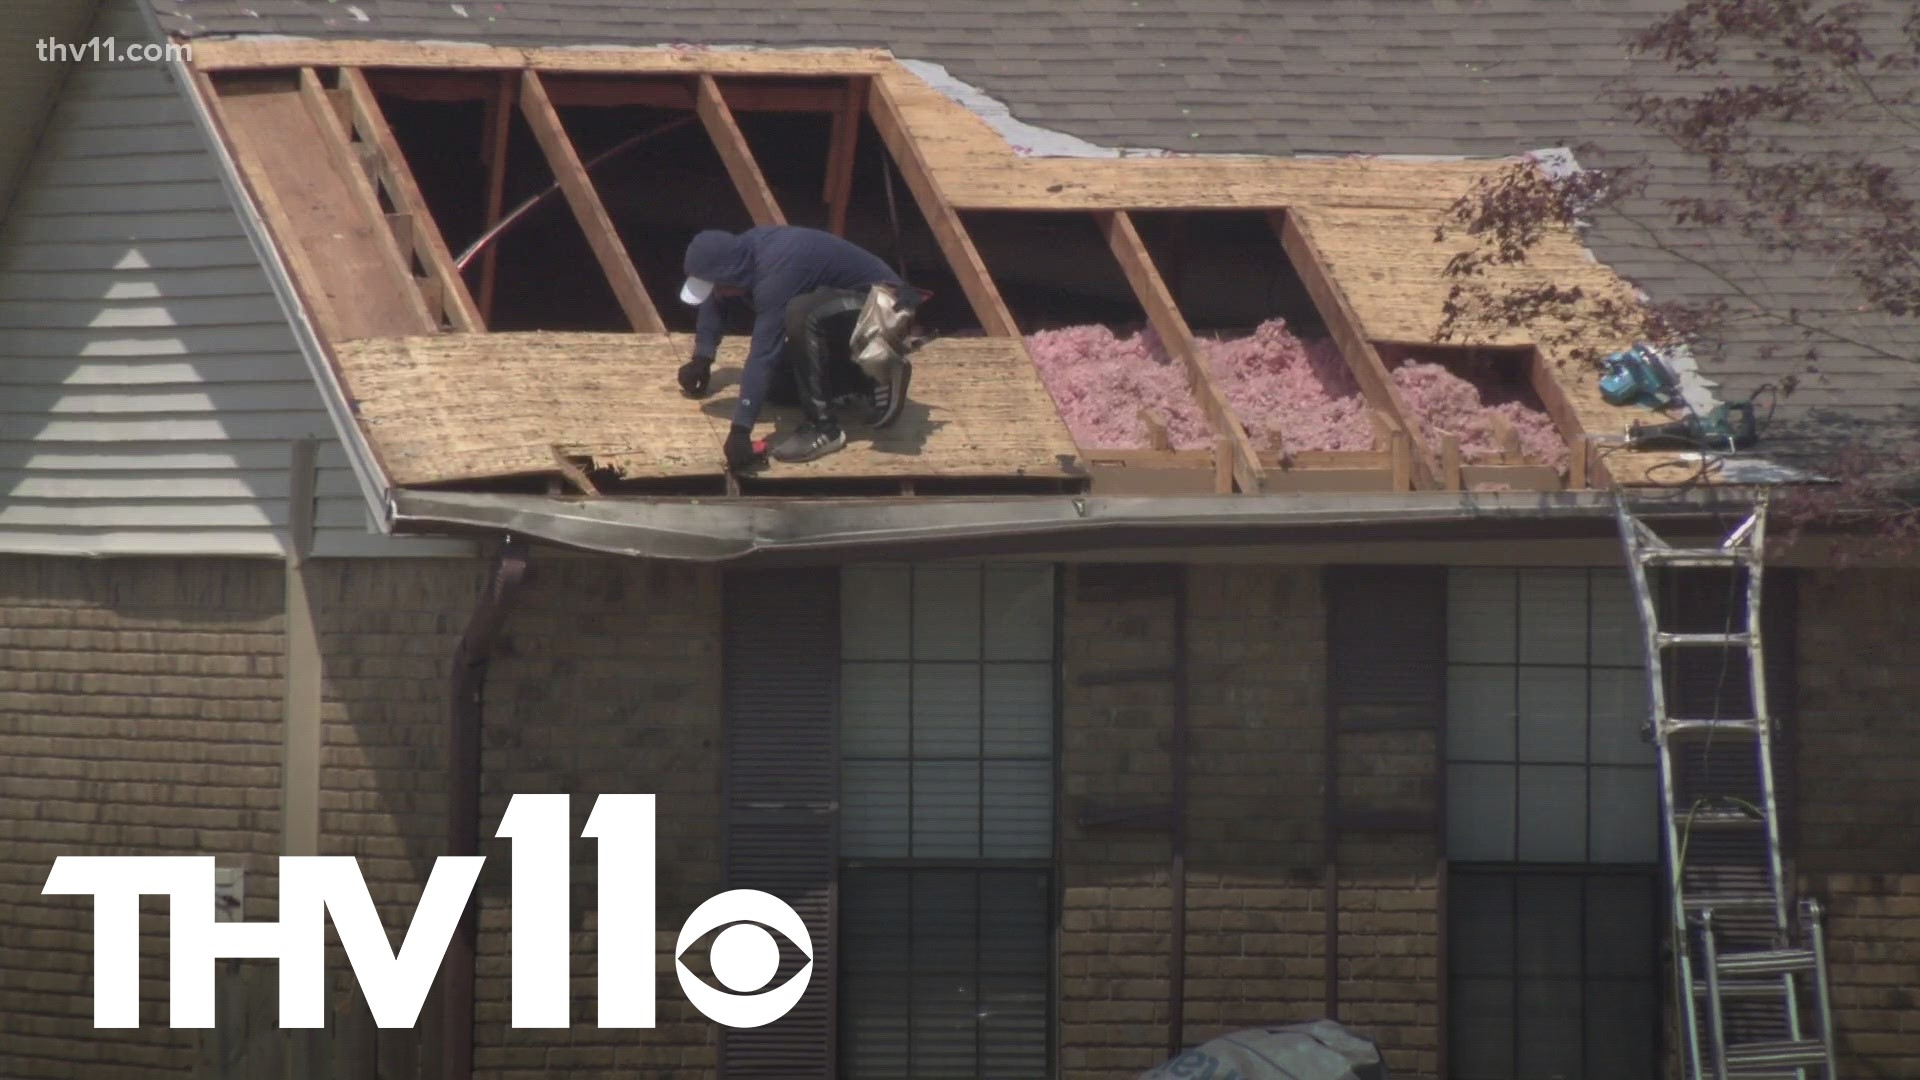 May 31 marks two months since an EF-3 tornado tore through Little Rock. Some residents are saying the recovery in their neighborhoods has been slow.